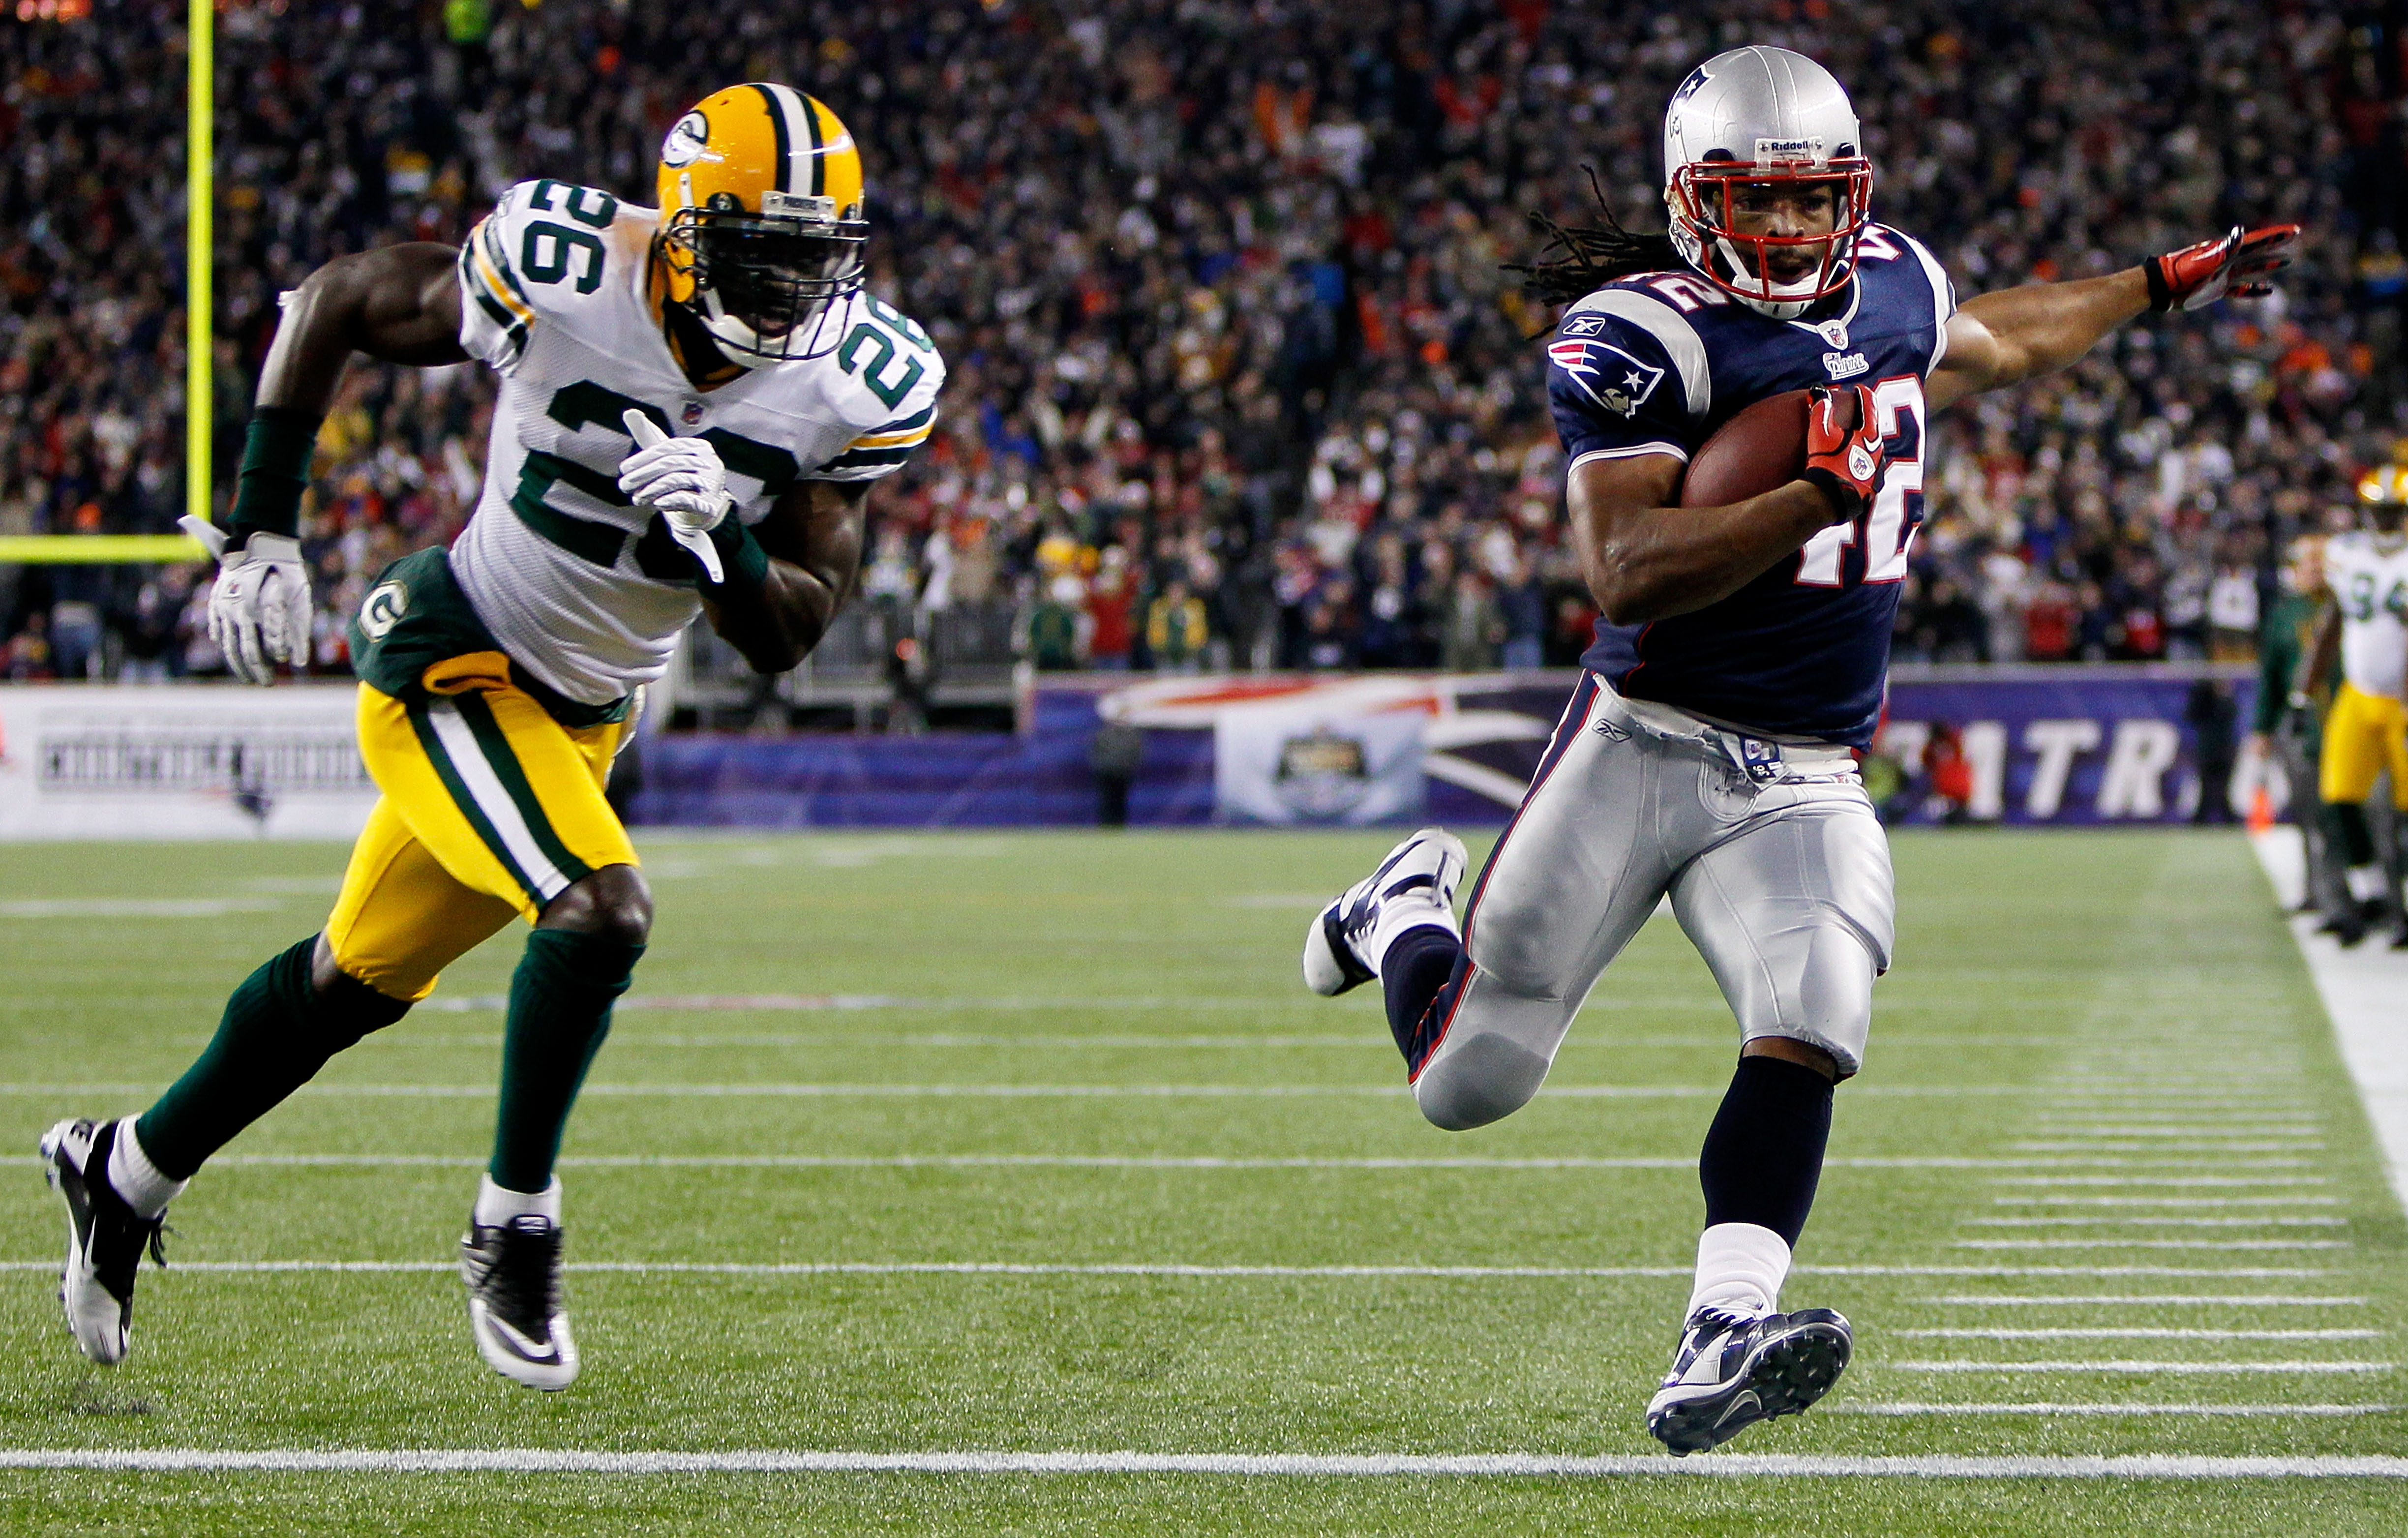 FOXBORO, MA - DECEMBER 19:  Running back BenJarvus Green-Ellis #42 of the New England Patriots runs 33 yards to score a touchdown in the first quarter against safety Charlie Peprah #26 of the Green Bay Packers at Gillette Stadium on December 19, 2010 in F